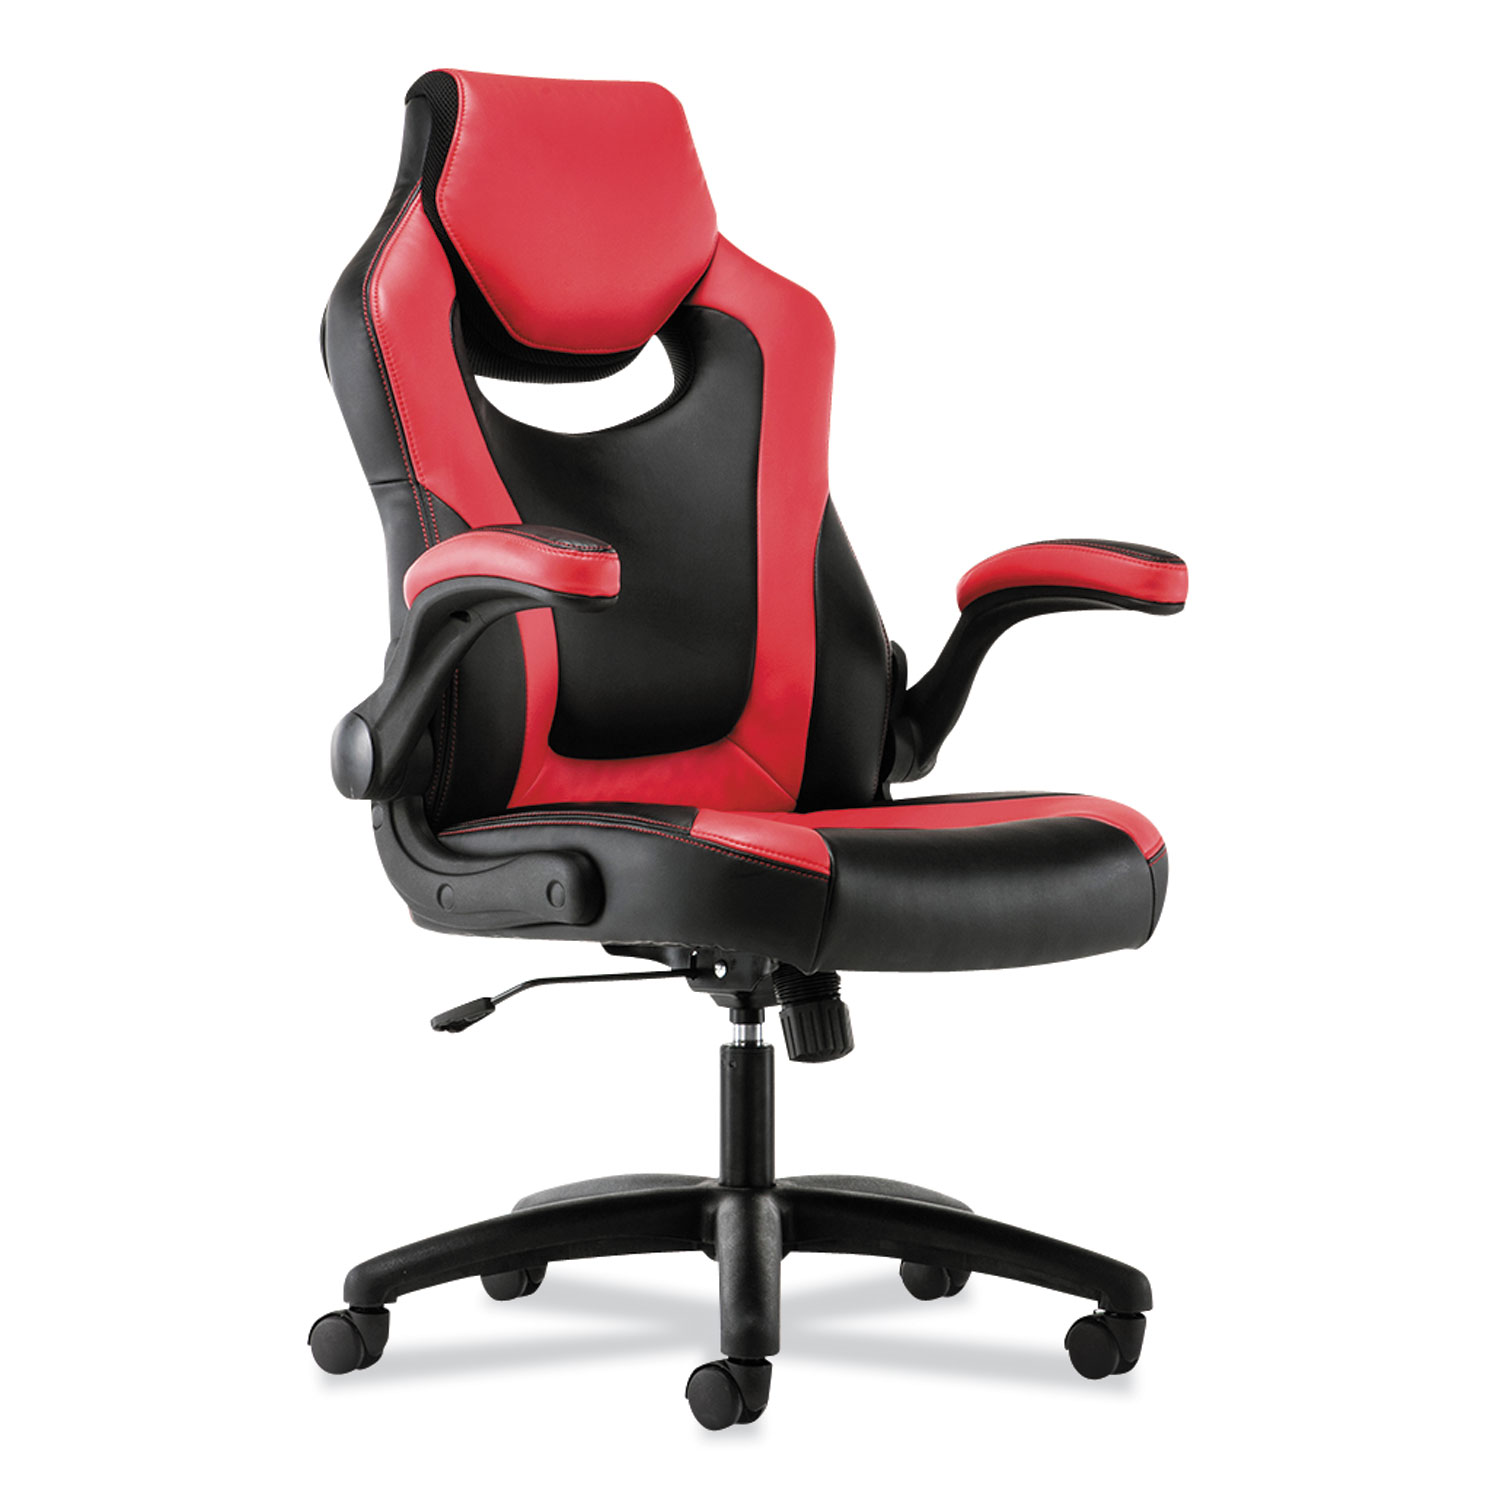  Sadie BSXVST912 9-Twelve High-Back Racing Style Chair with Flip-Up Arms, Supports up to 225 lbs., Black Seat/Red Back, Black Base (BSXVST912) 